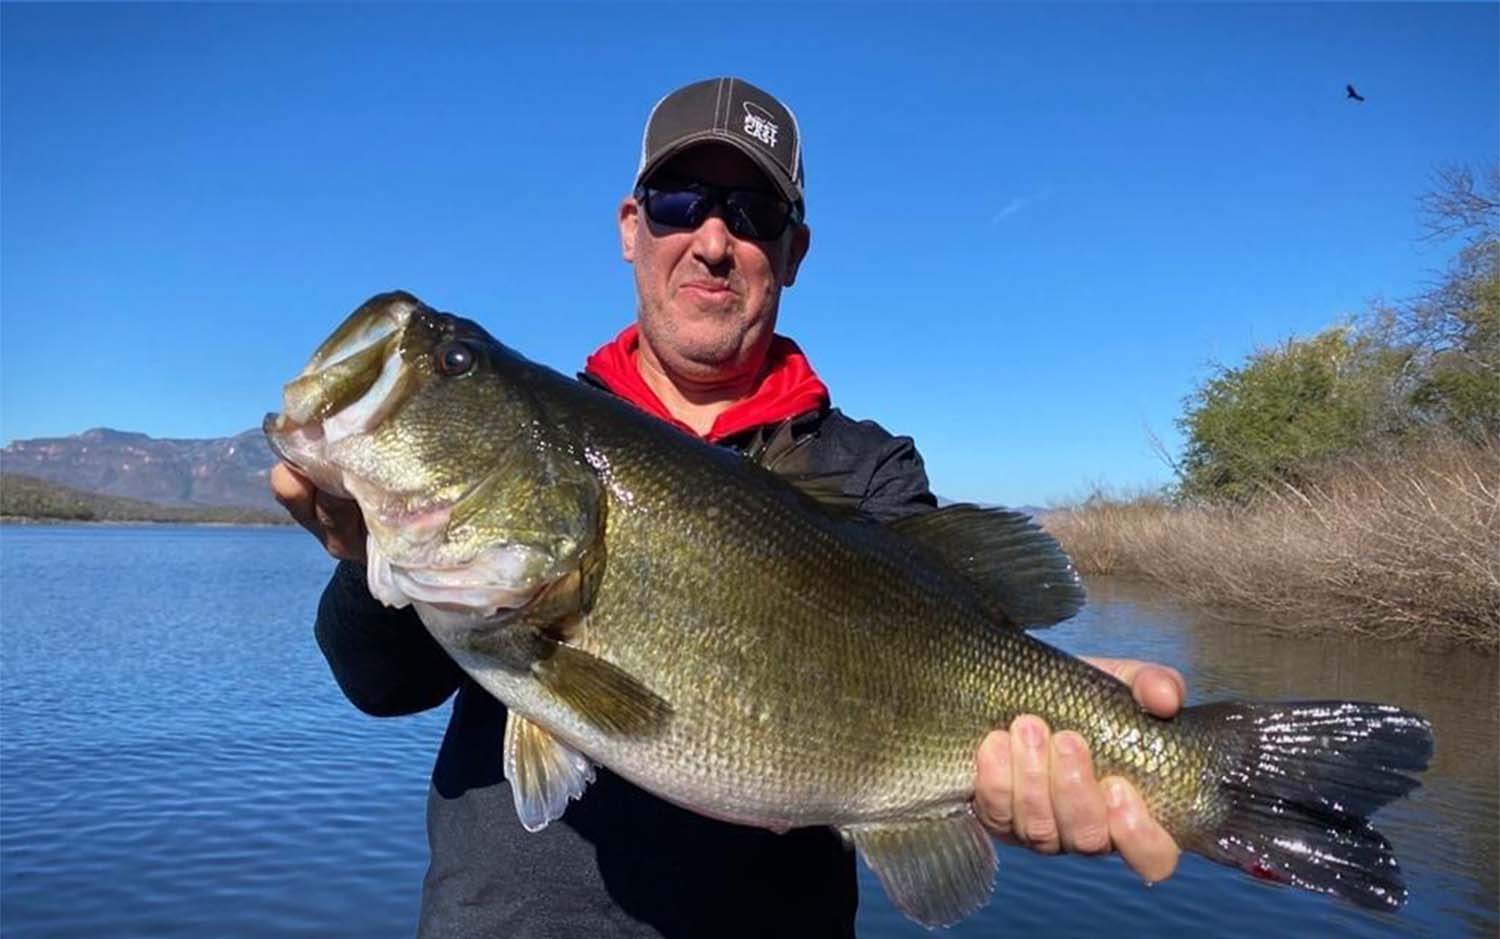 The author used the best fishing line for bass to catch his new personal best.